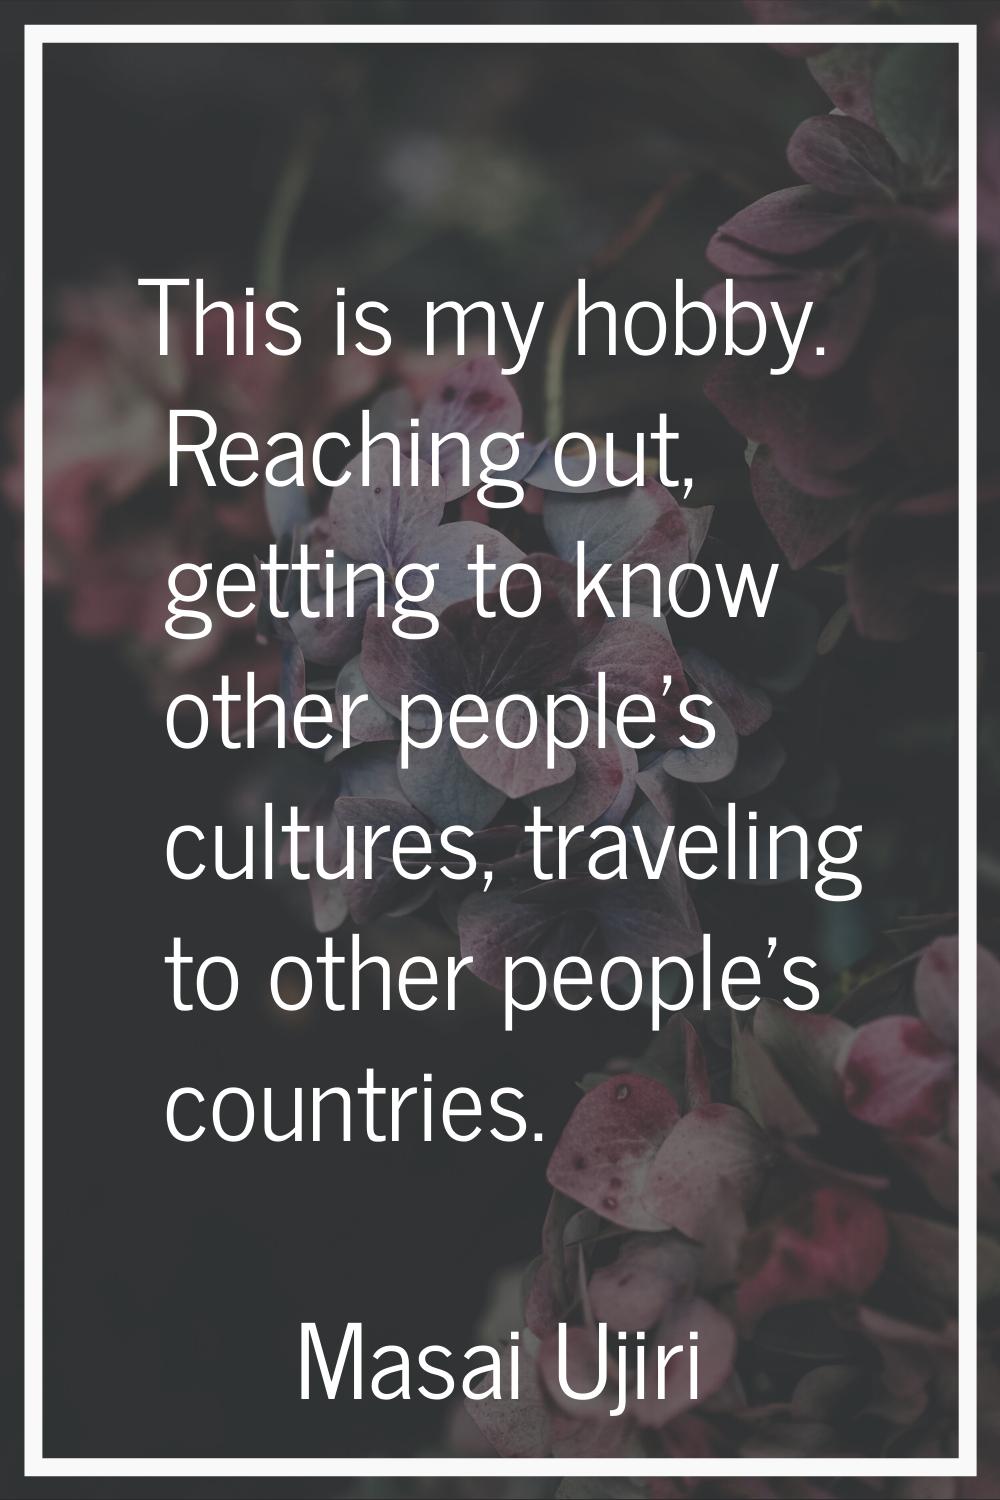 This is my hobby. Reaching out, getting to know other people's cultures, traveling to other people'